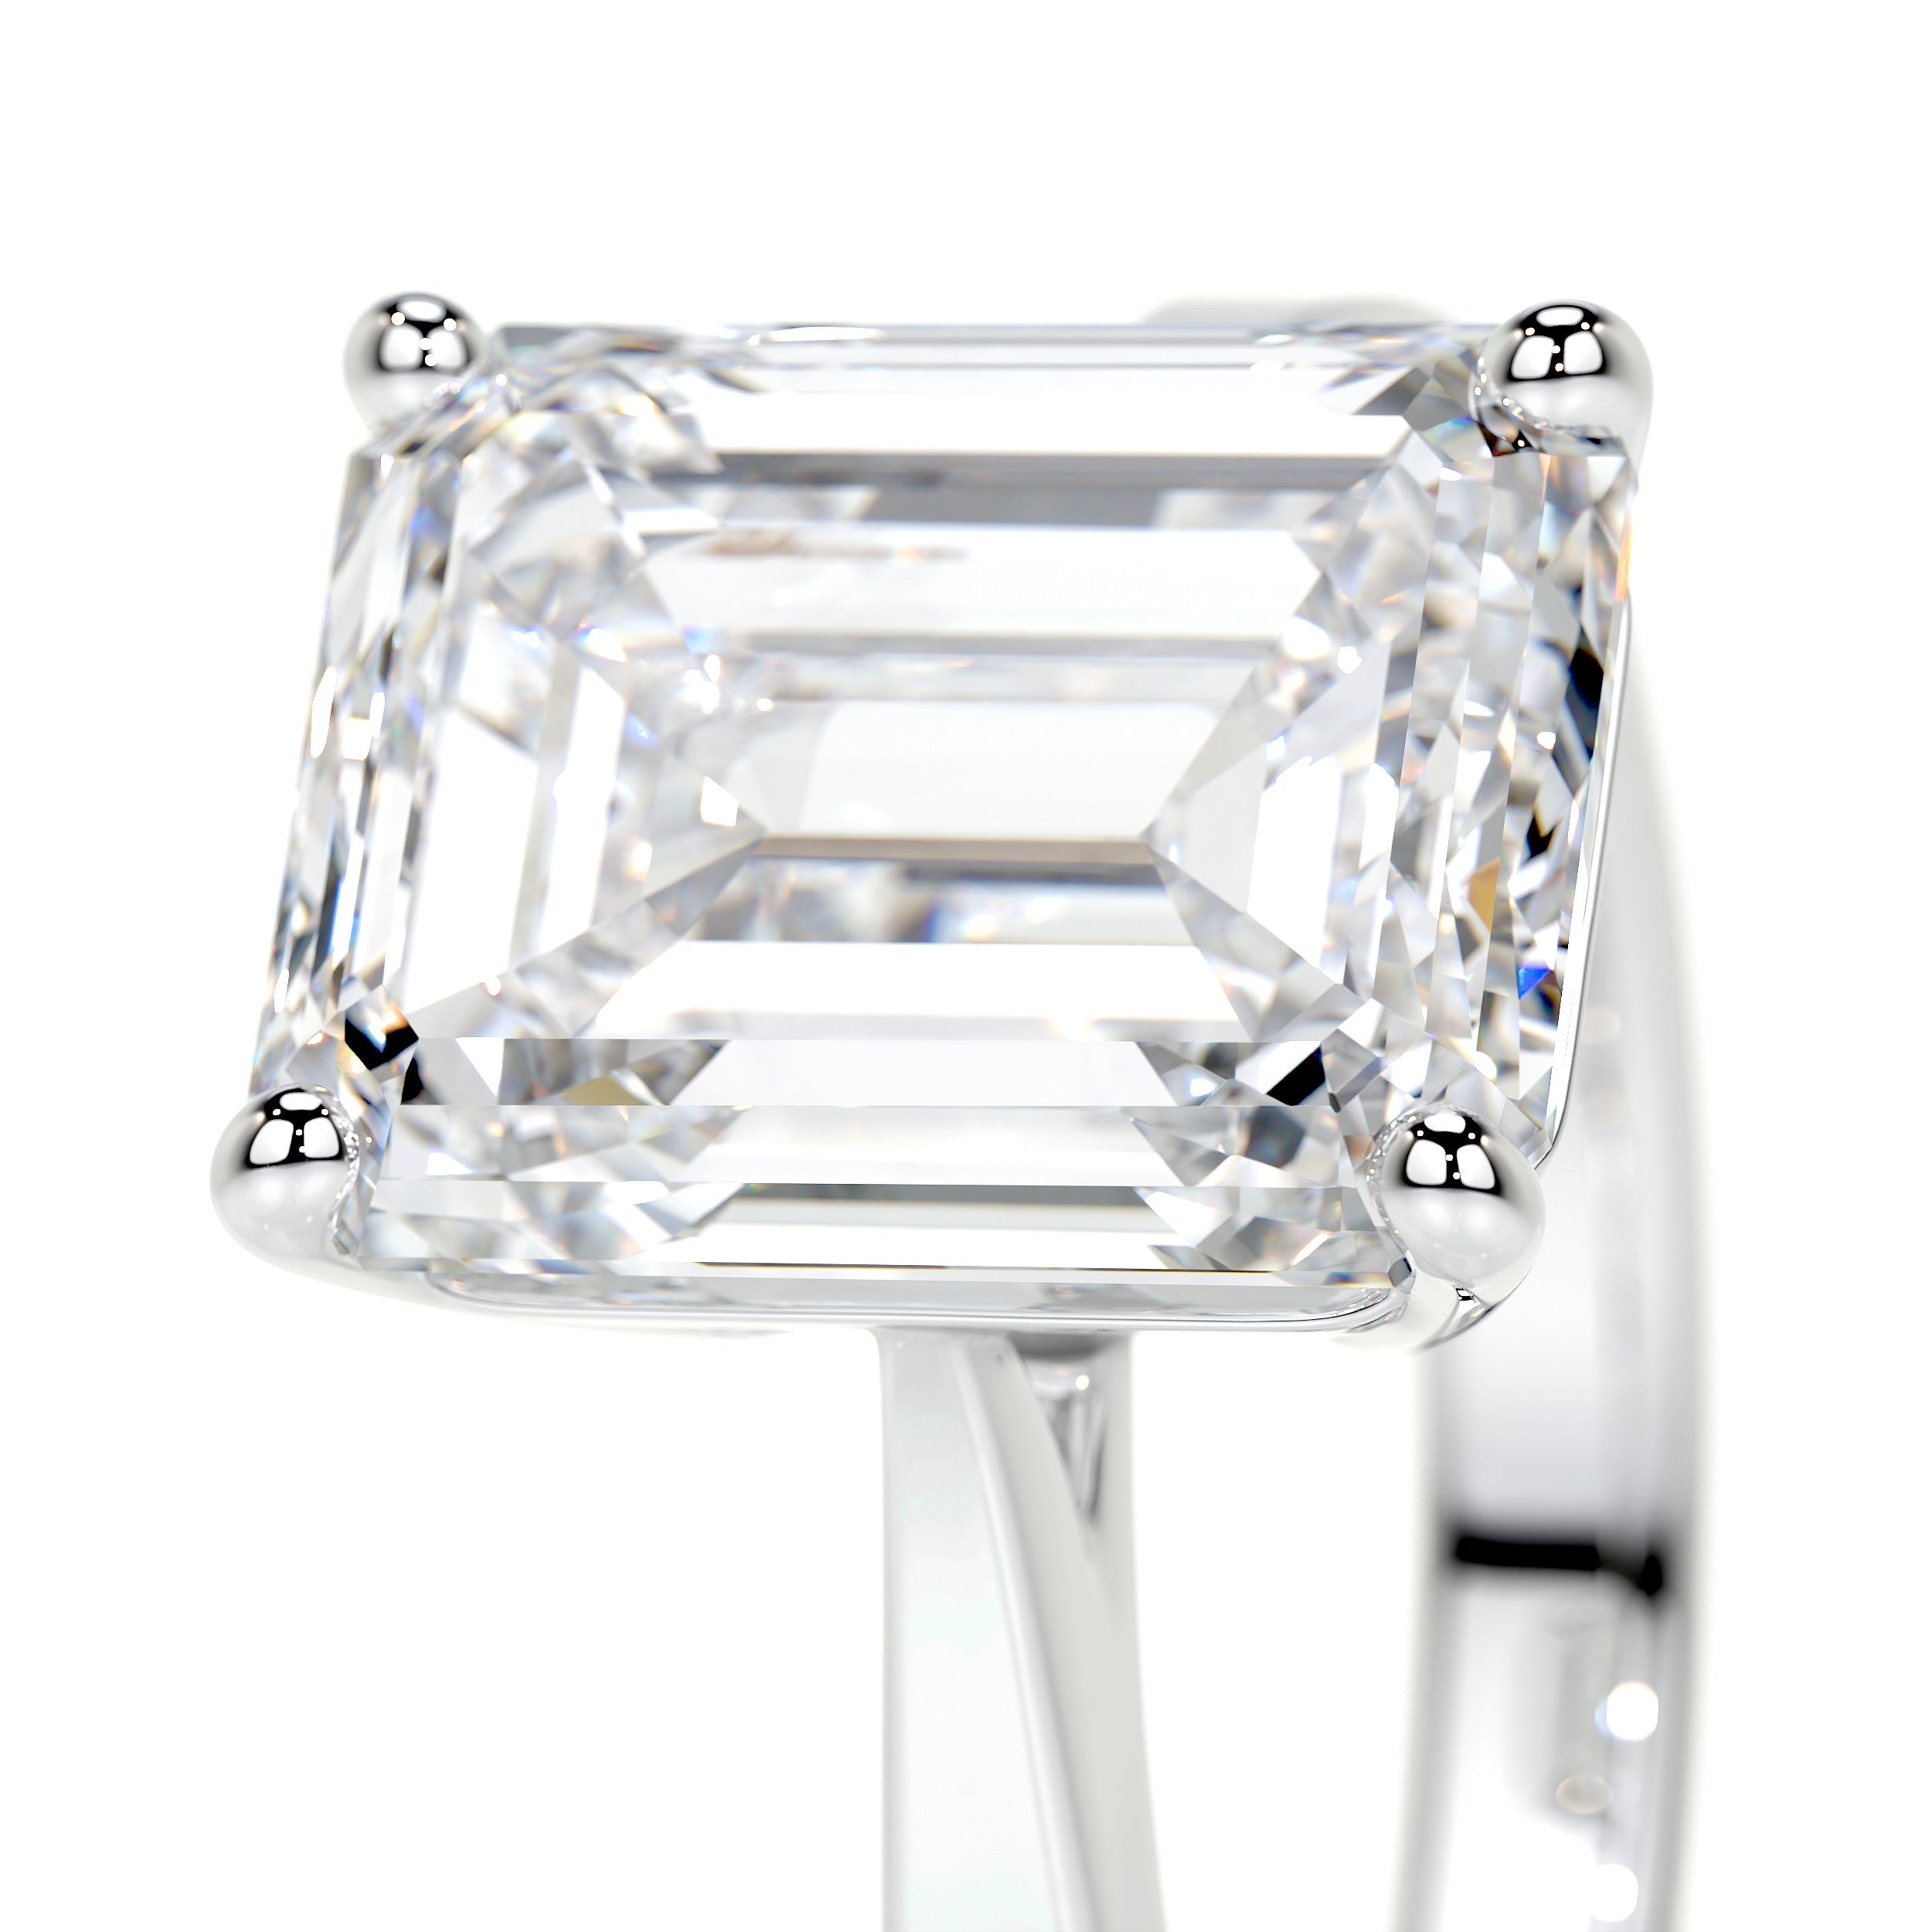 READY TO SHIP: Florentina ring in 14K white gold, lab grown diamond emerald  cut 7x4* mm, accents lab grown diamonds, AVAILABLE RING SIZES: 6-8US